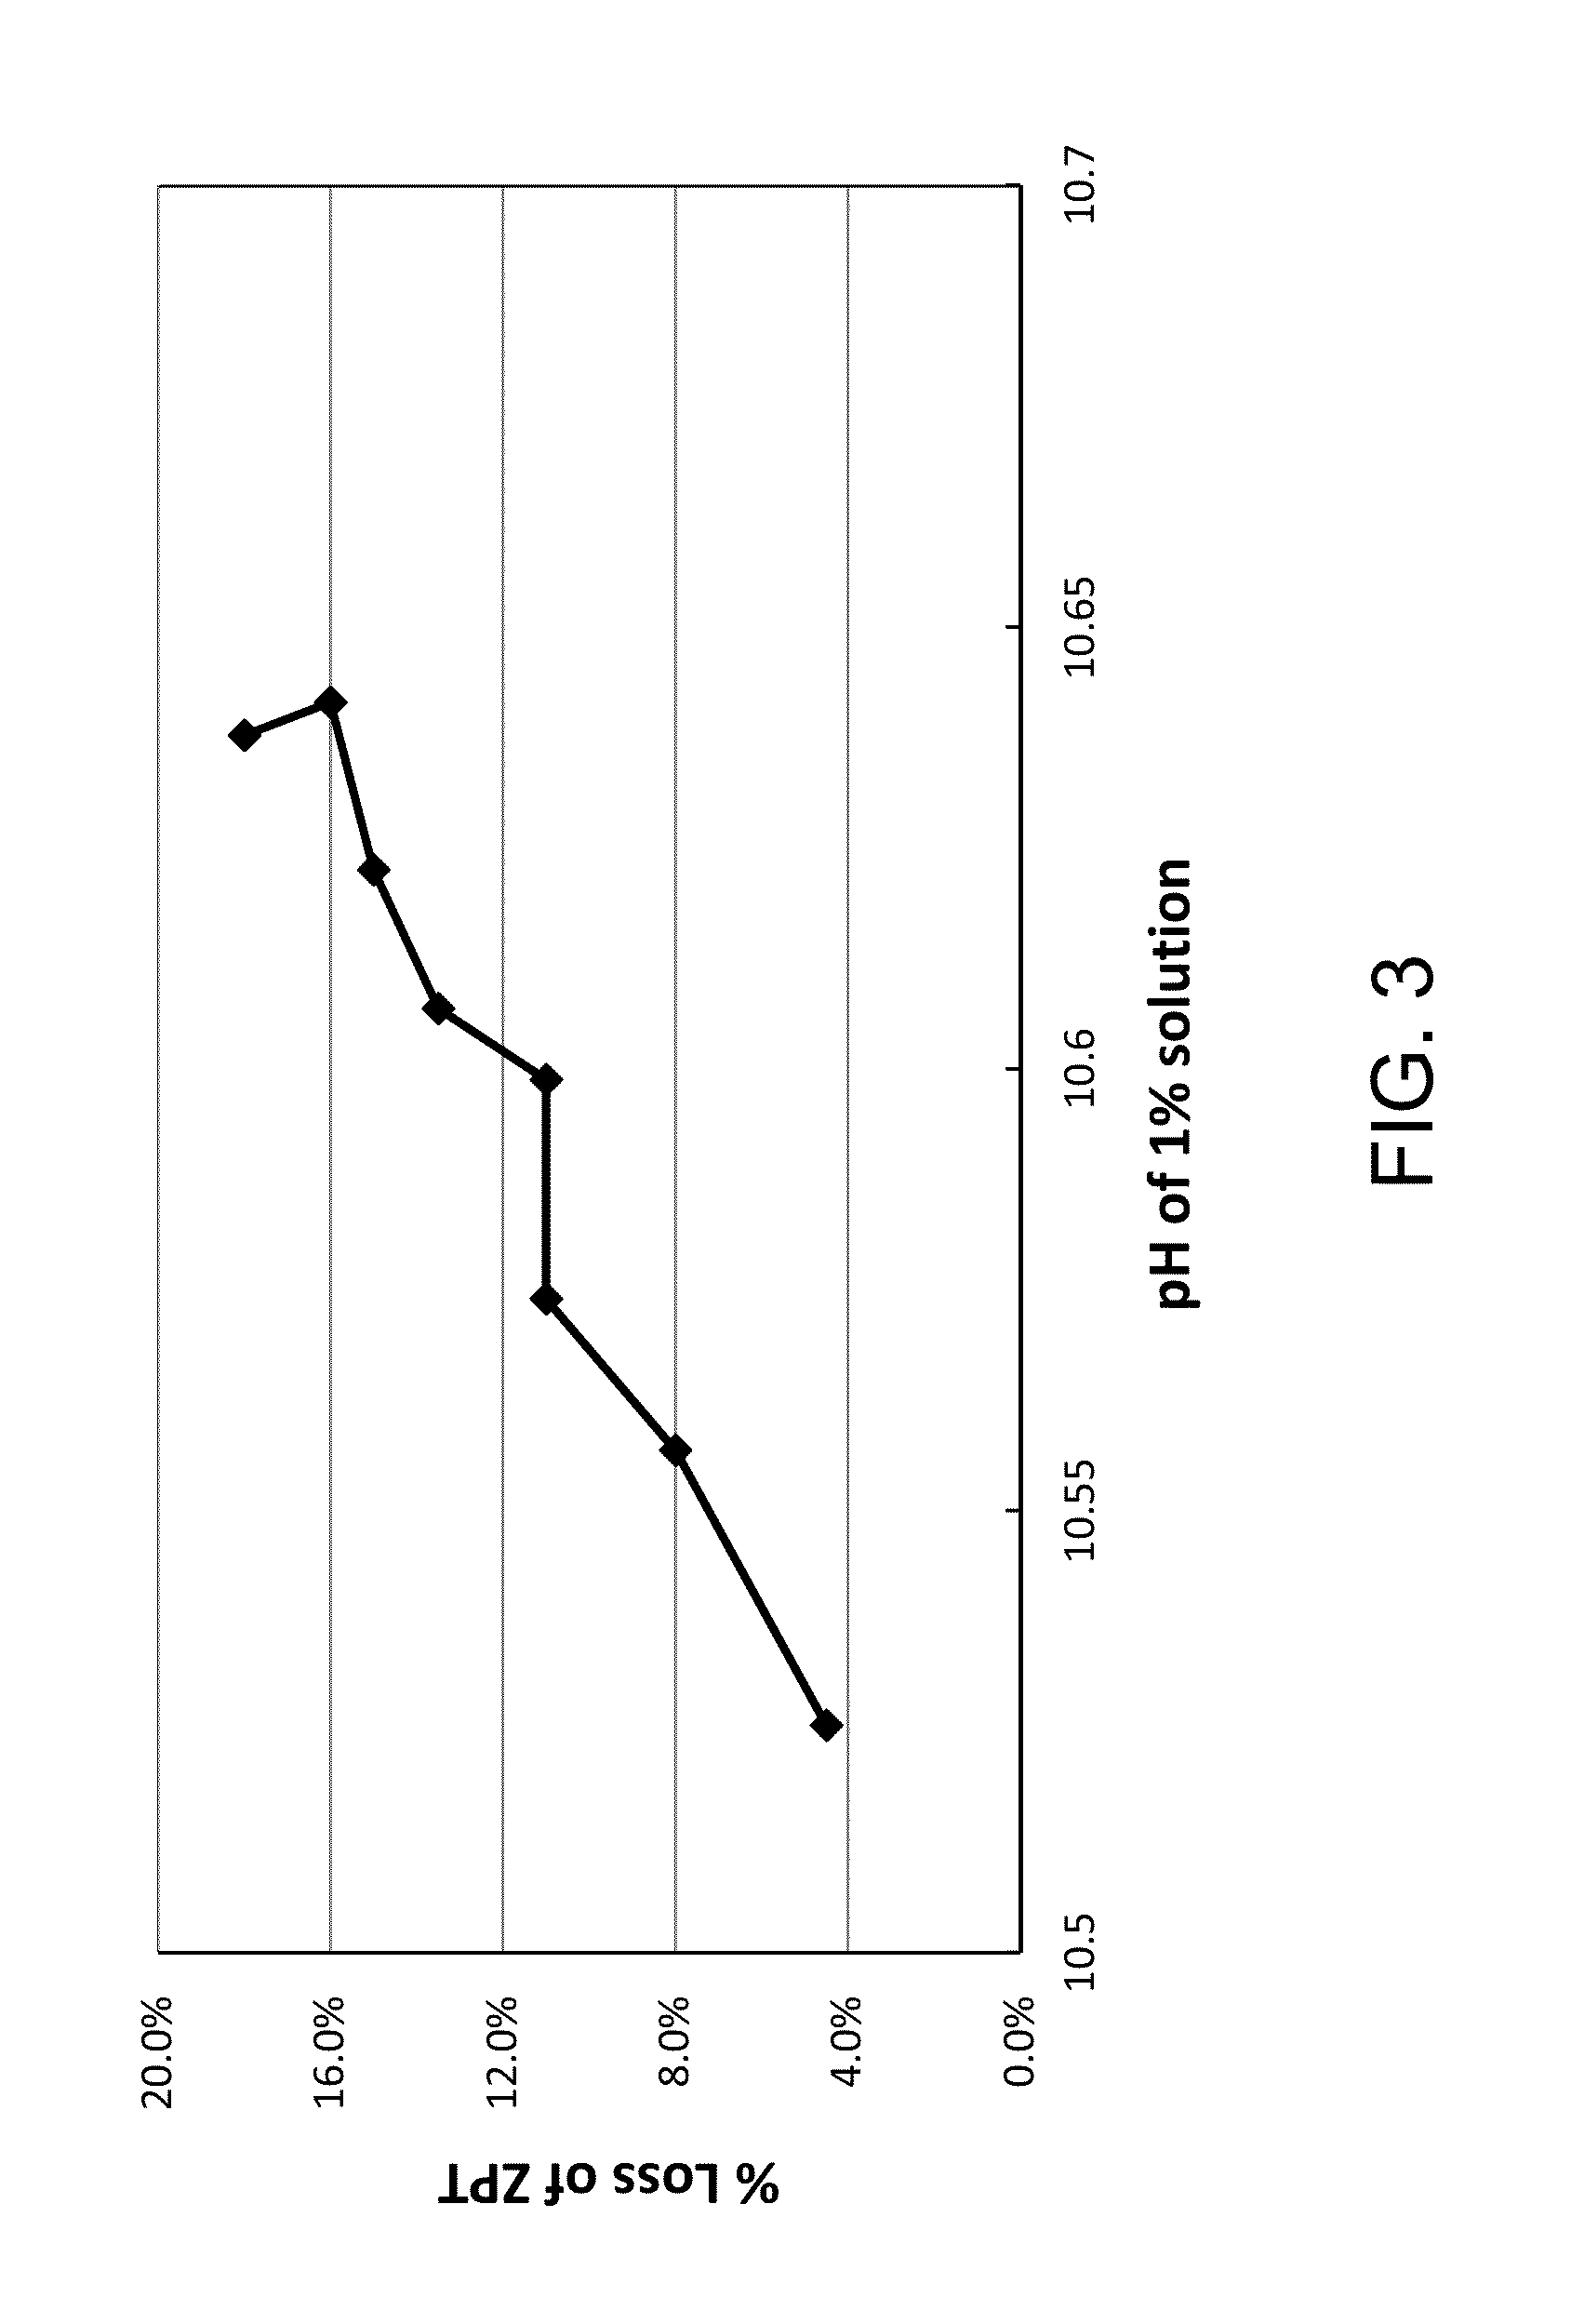 Personal Cleansing Compositions Comprising Zinc Pyrithione